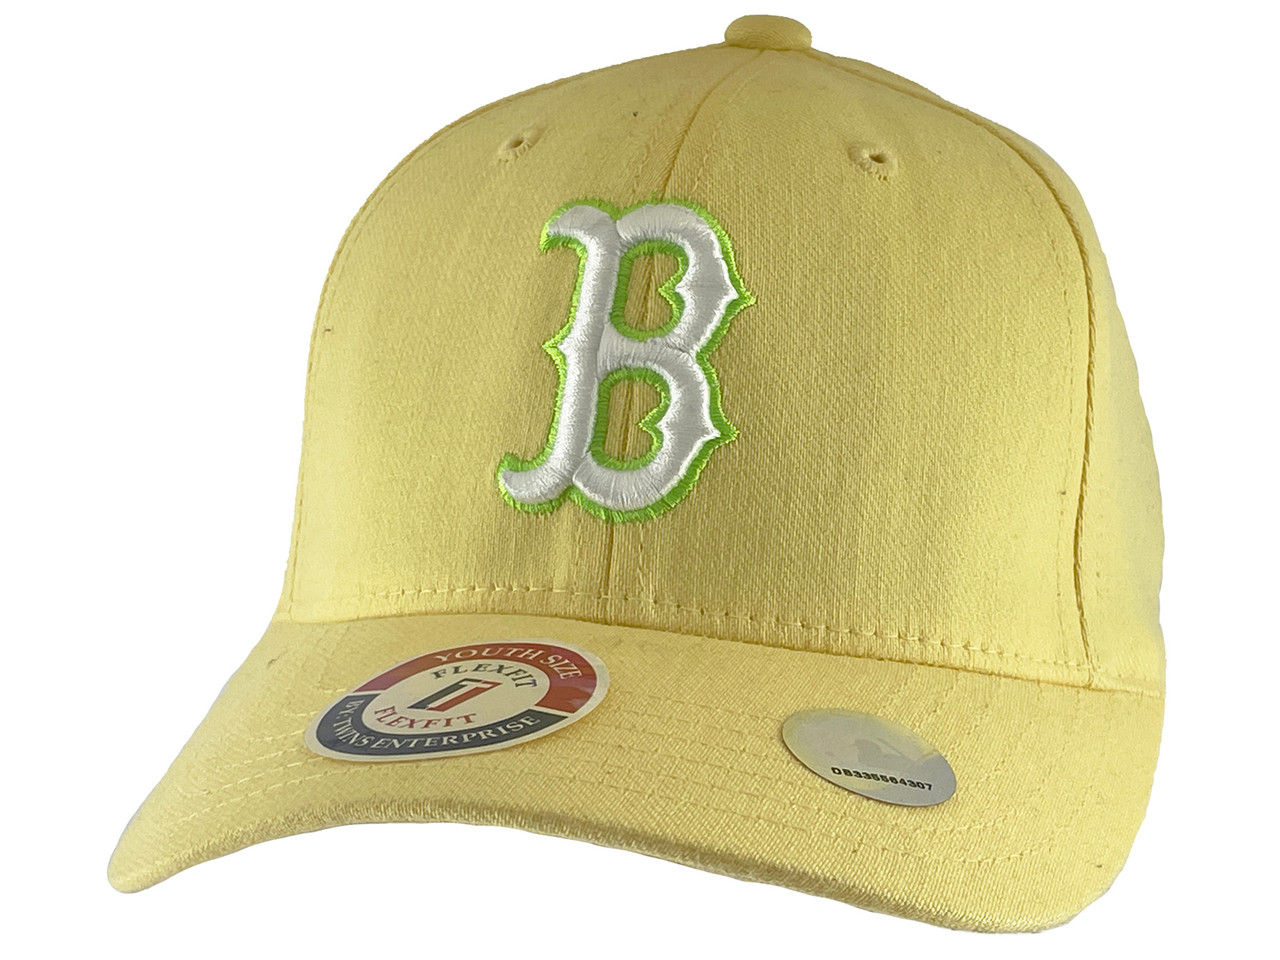 Light Yellow Youth Size Flex Fit Hat - Boston Red Sox